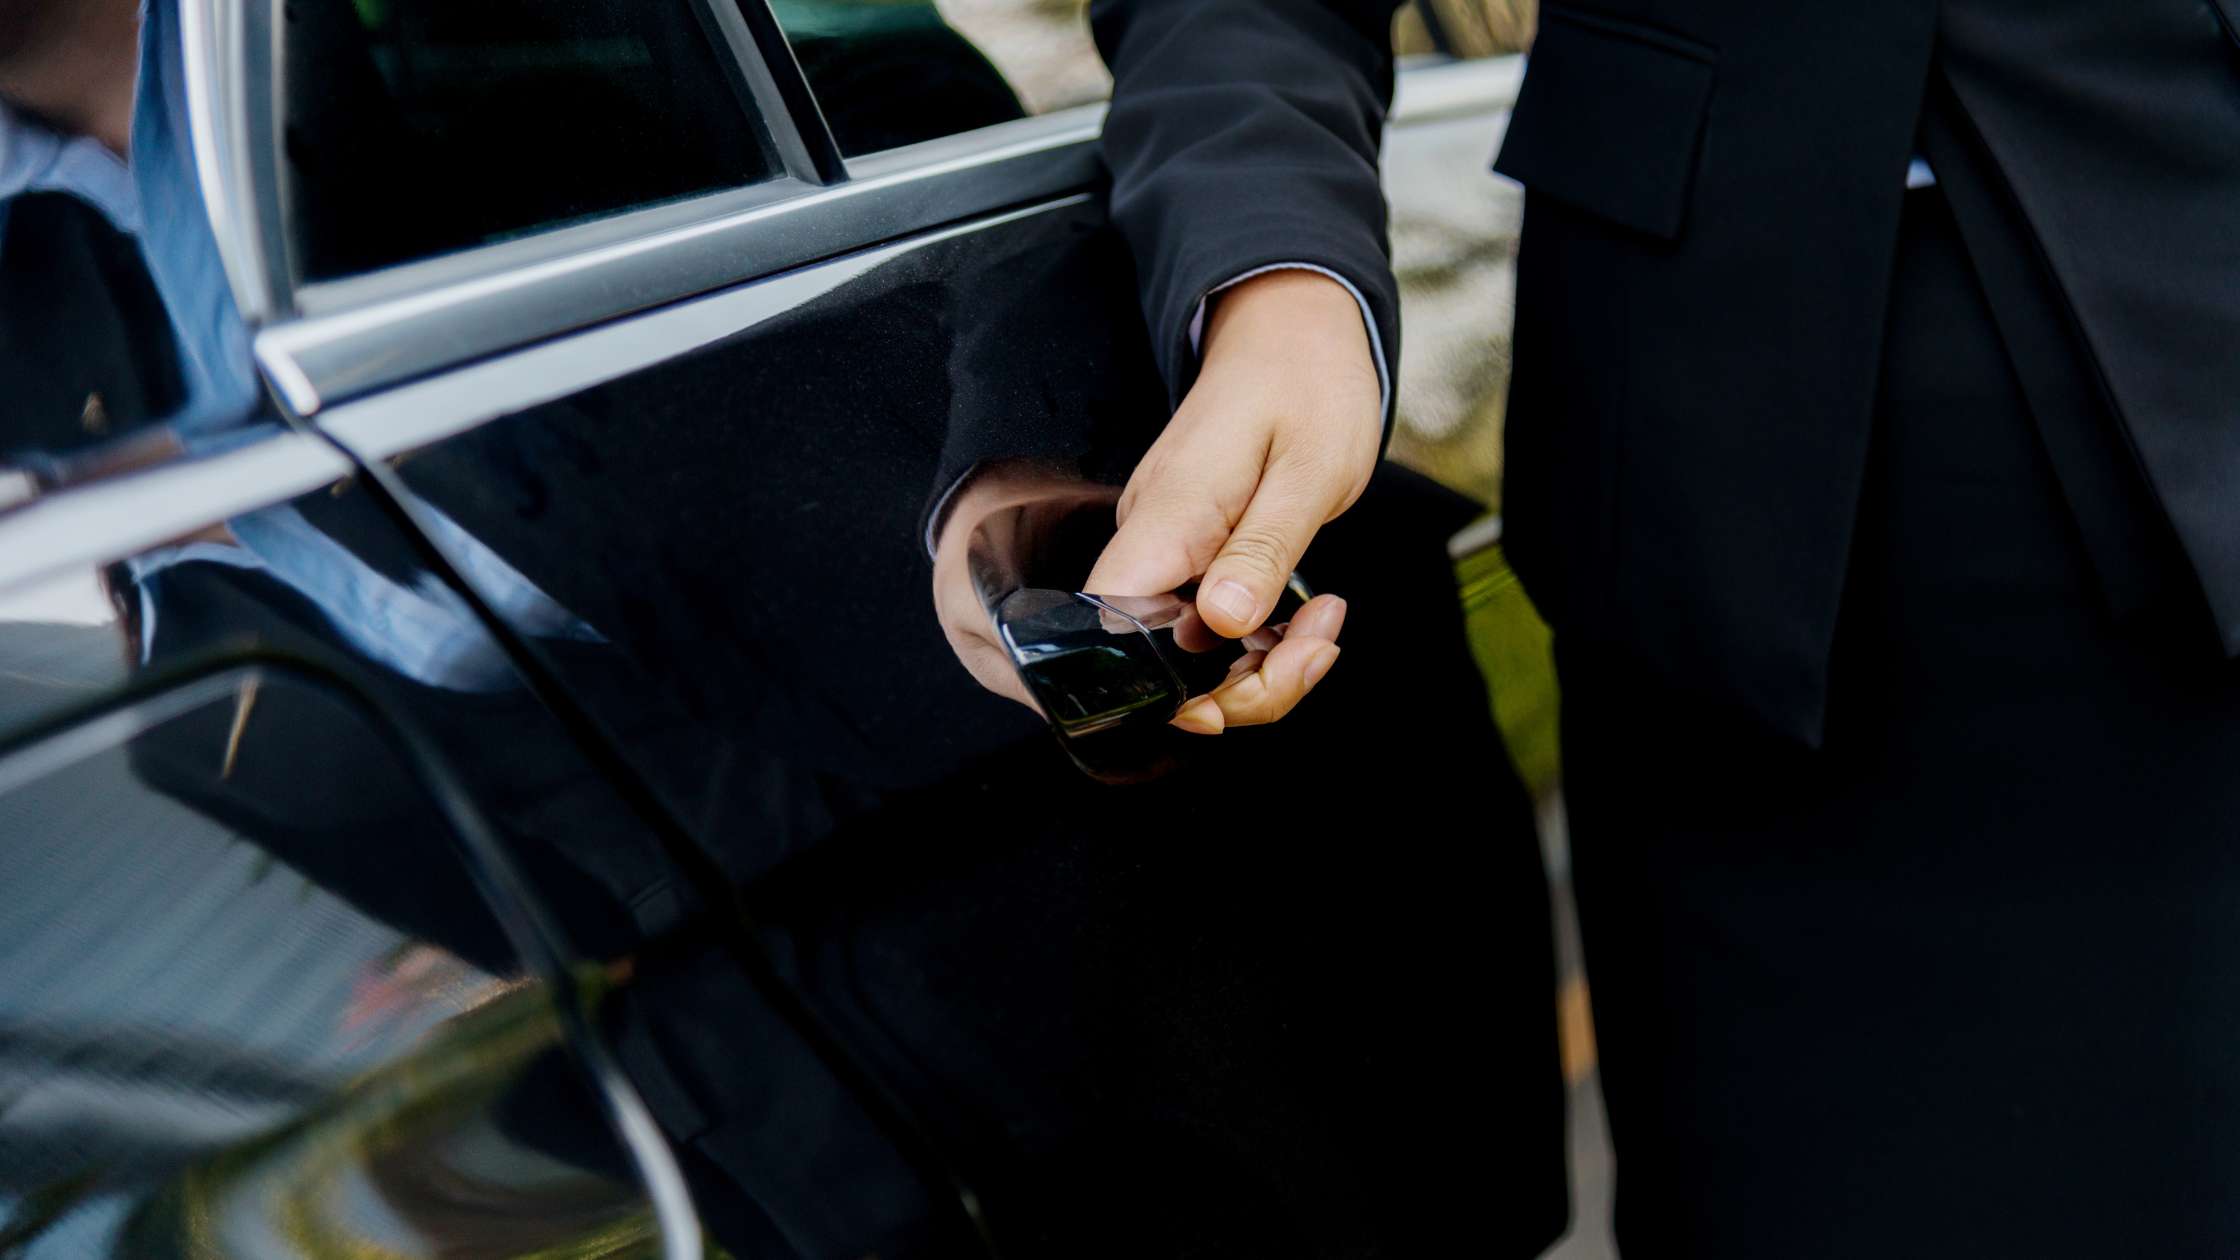 Finding the best chauffeur service in Connecticut isn't always easy. Fortunately, Vitesse put together some efficient tips to find the best chauffeur service.